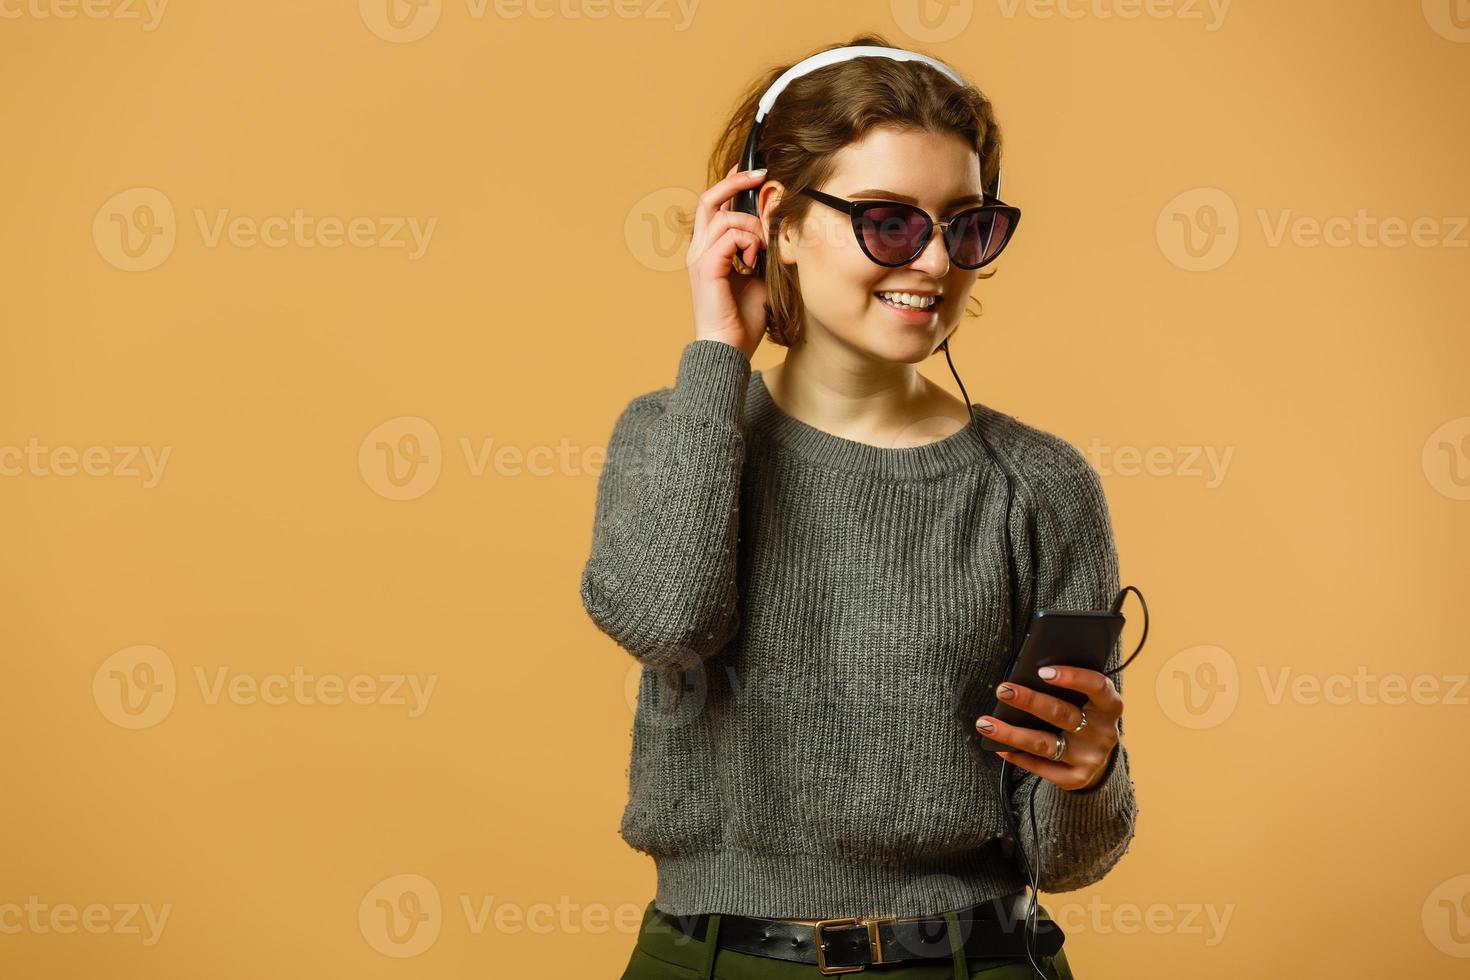 Smiling woman listening music in headphones and using smartphone over yellow background photo